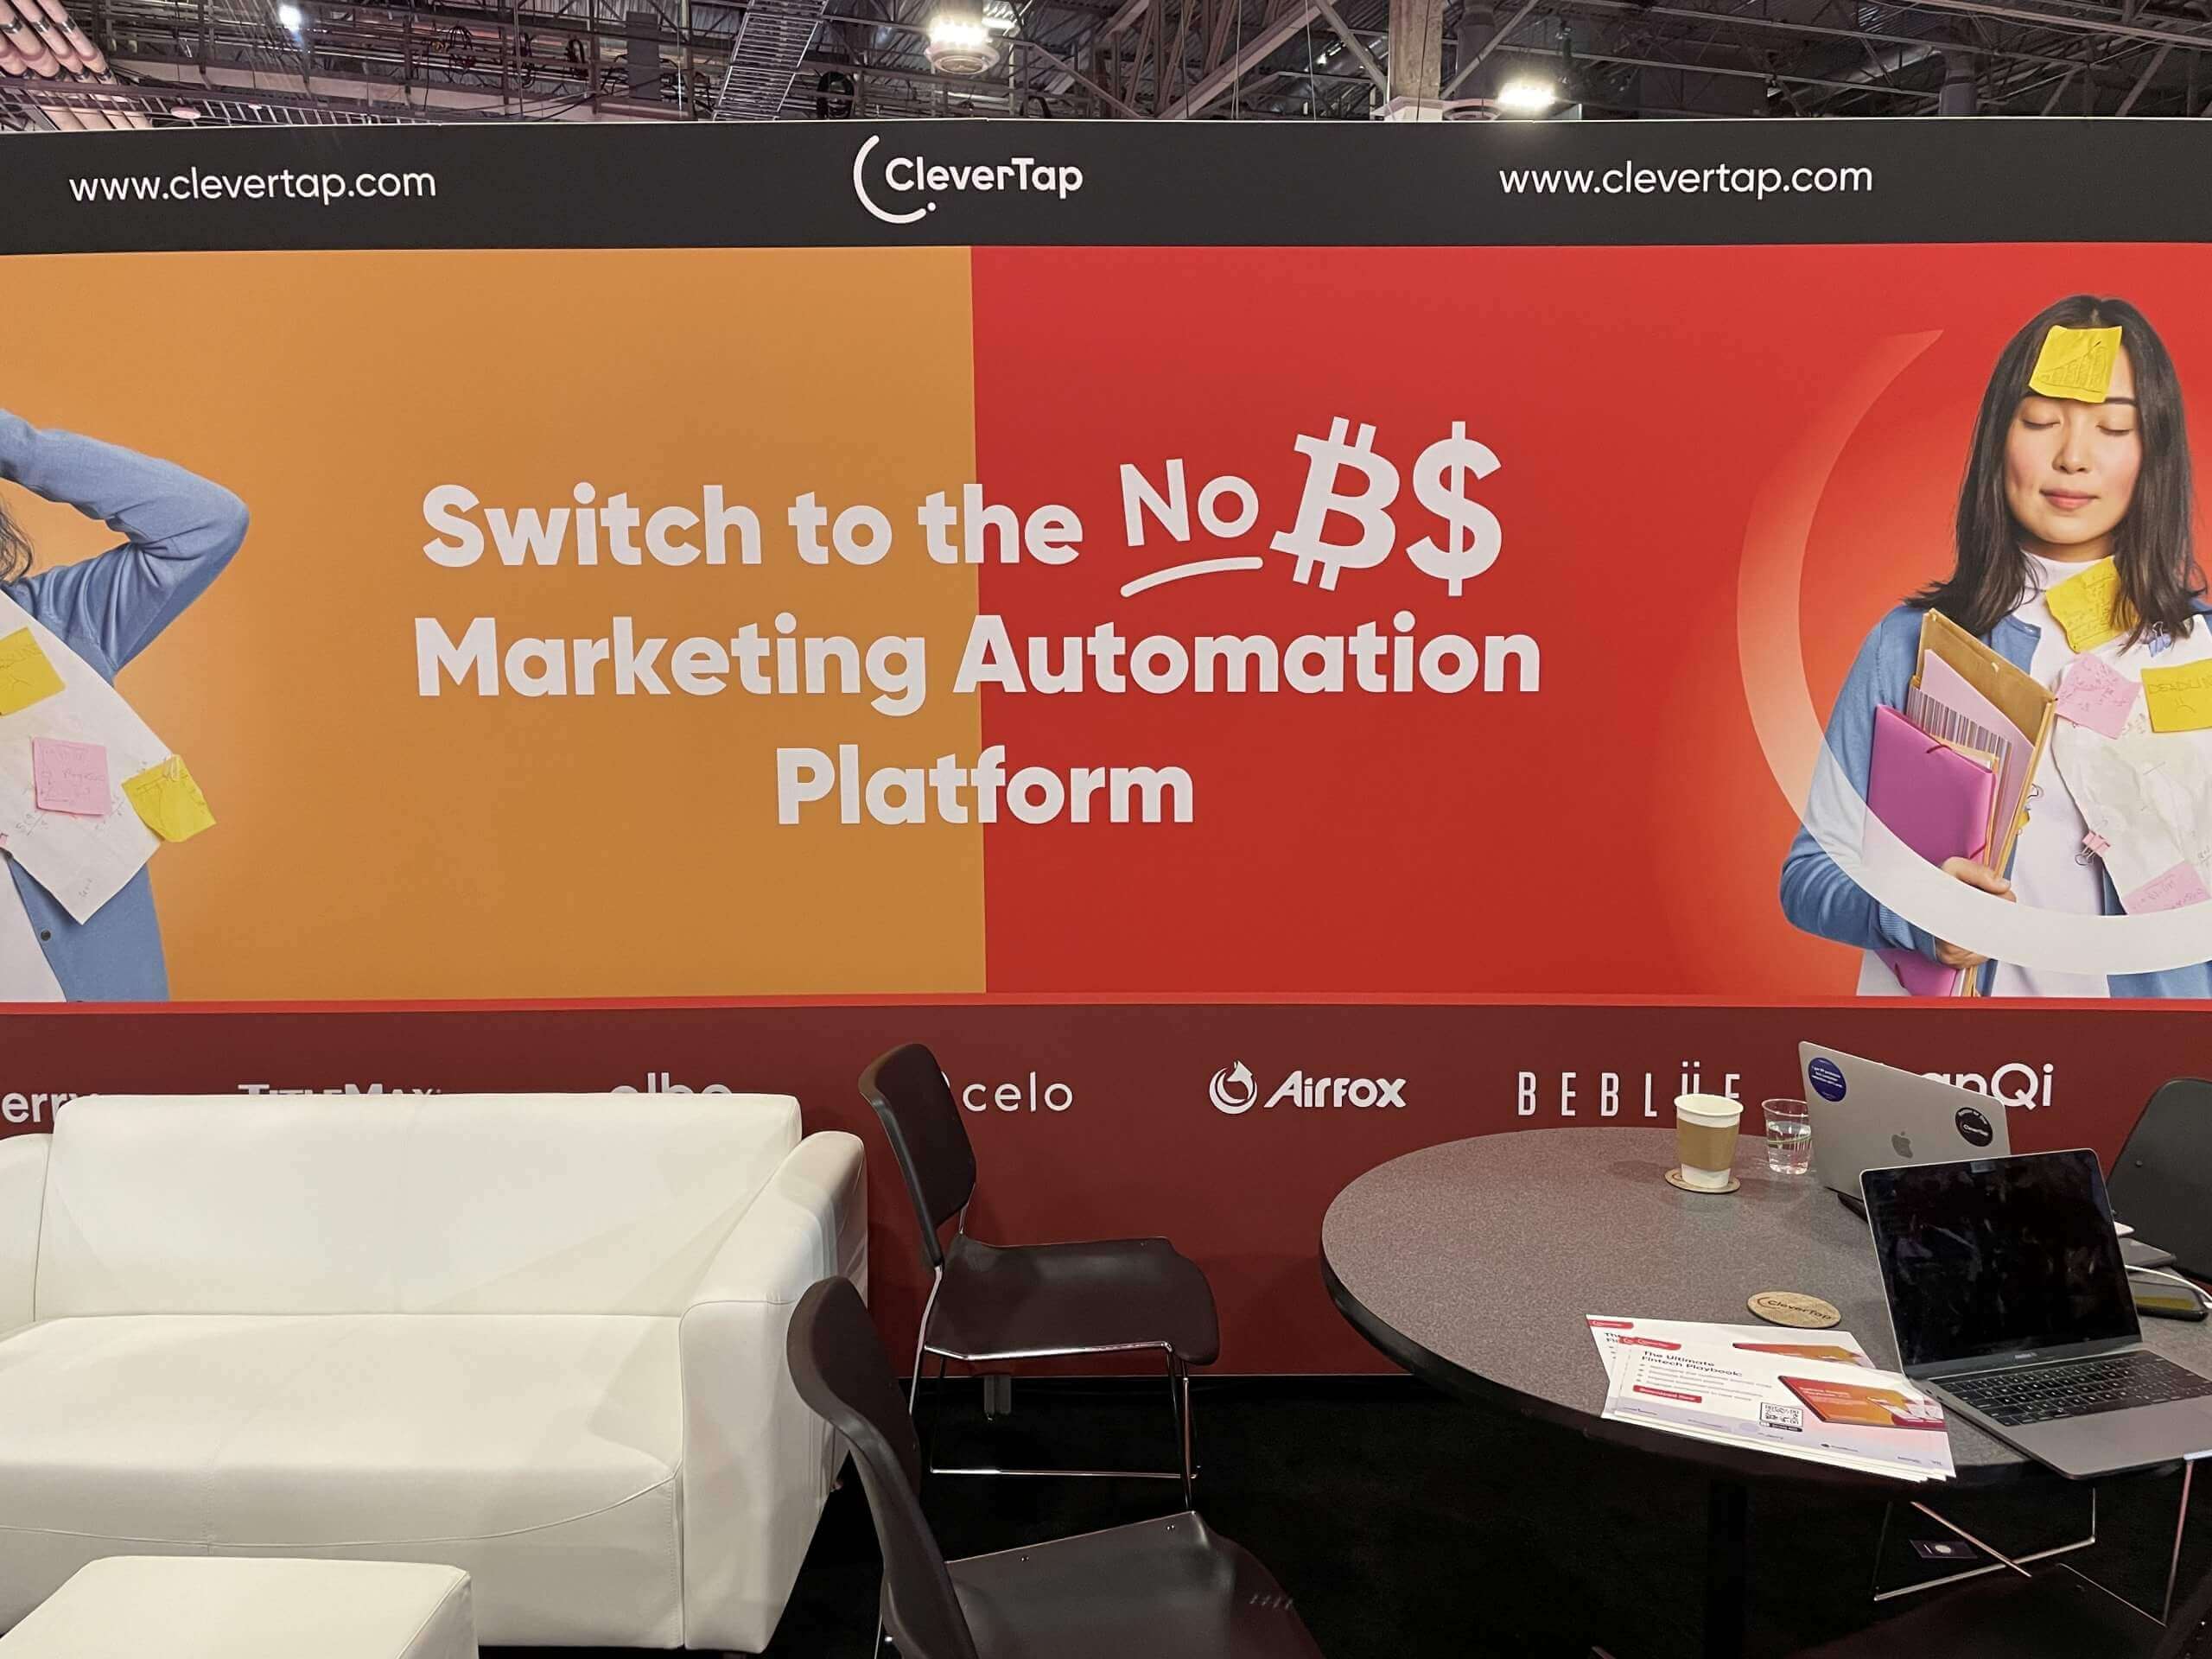 The CleverTap booth at Money 20/20